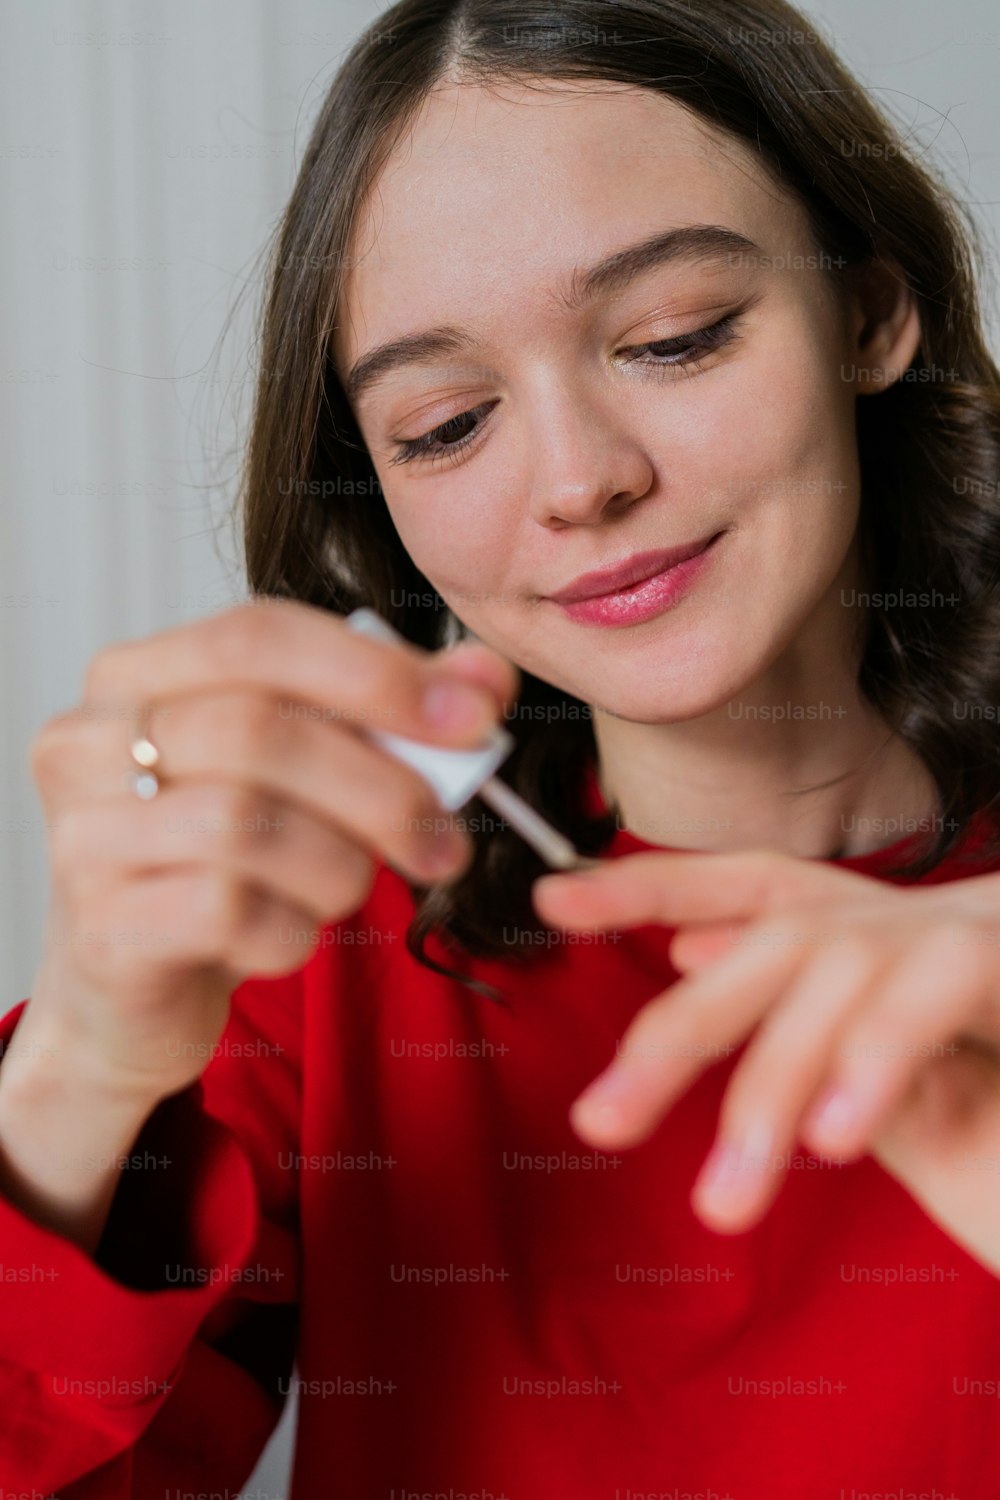 a woman in a red shirt is holding a toothbrush